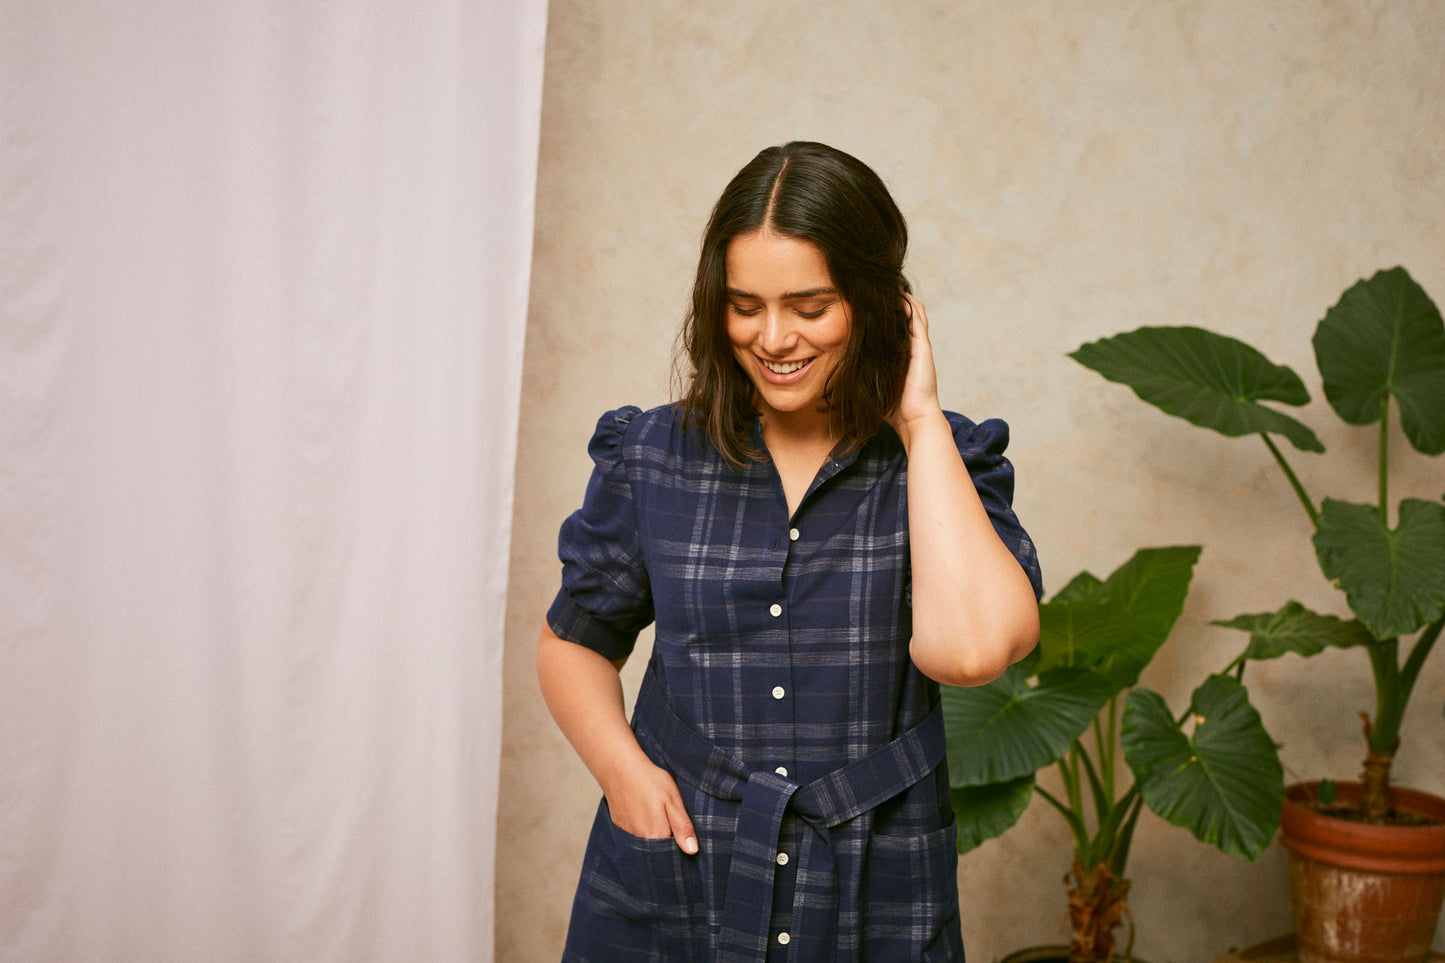 Close up crop of model wearing Saywood's Rosa navy check shirtdress, with belt loosely tied round the waist. The model is smiling with one hand to the back of her head, and a plant and drop of pink fabric can be seen in the background.